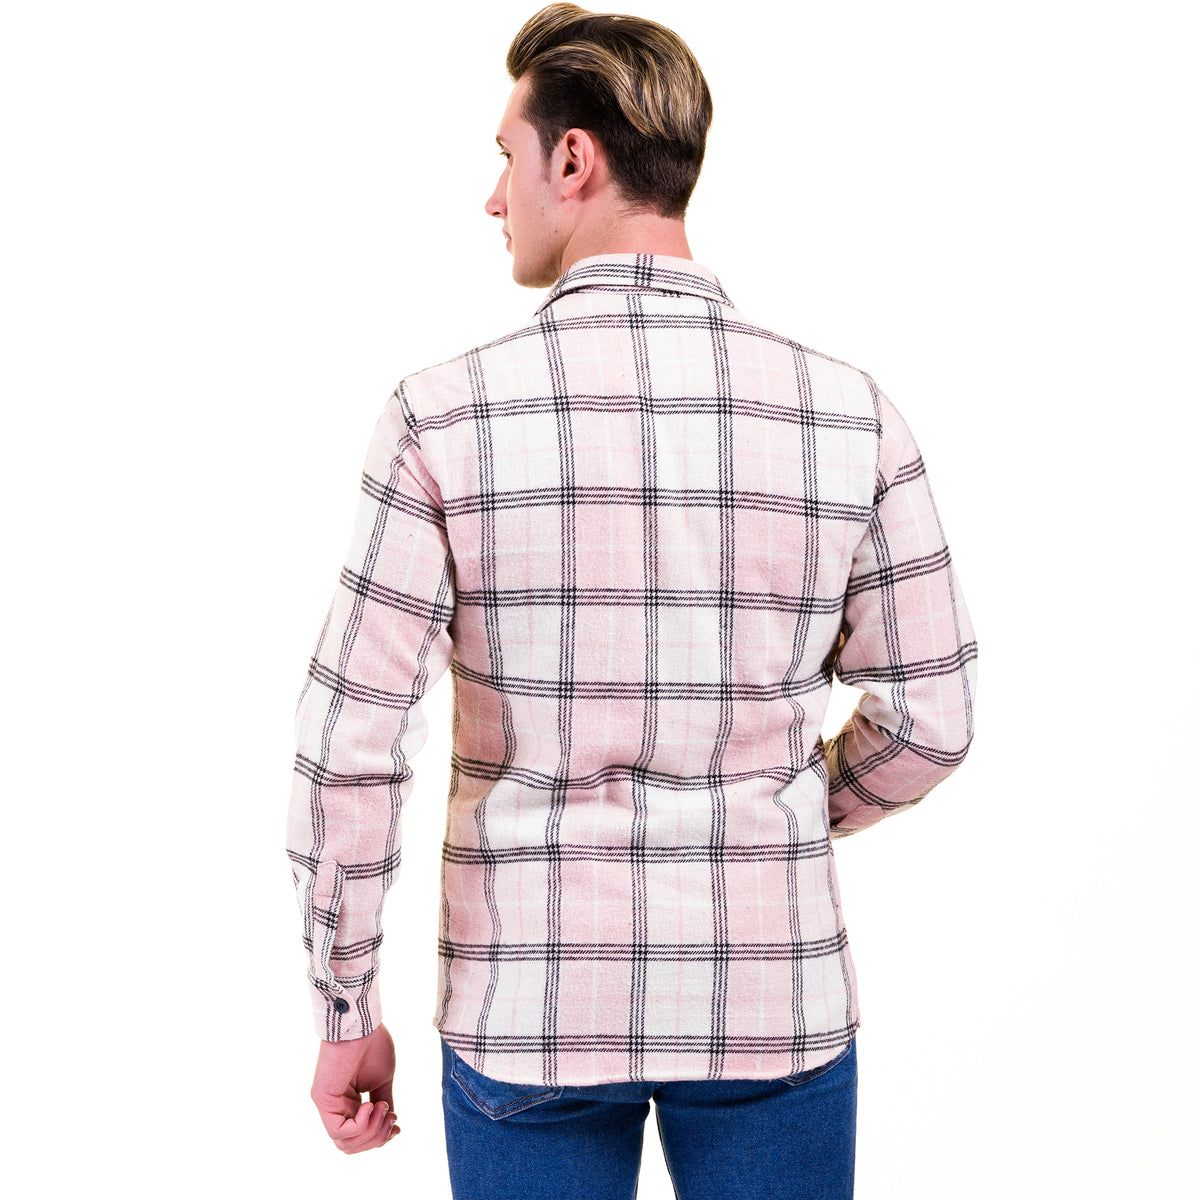 Salmon Pink White Check Mens Slim Fit Designer Dress Shirt - tailored Cotton Shirts for Work and Casual Wear